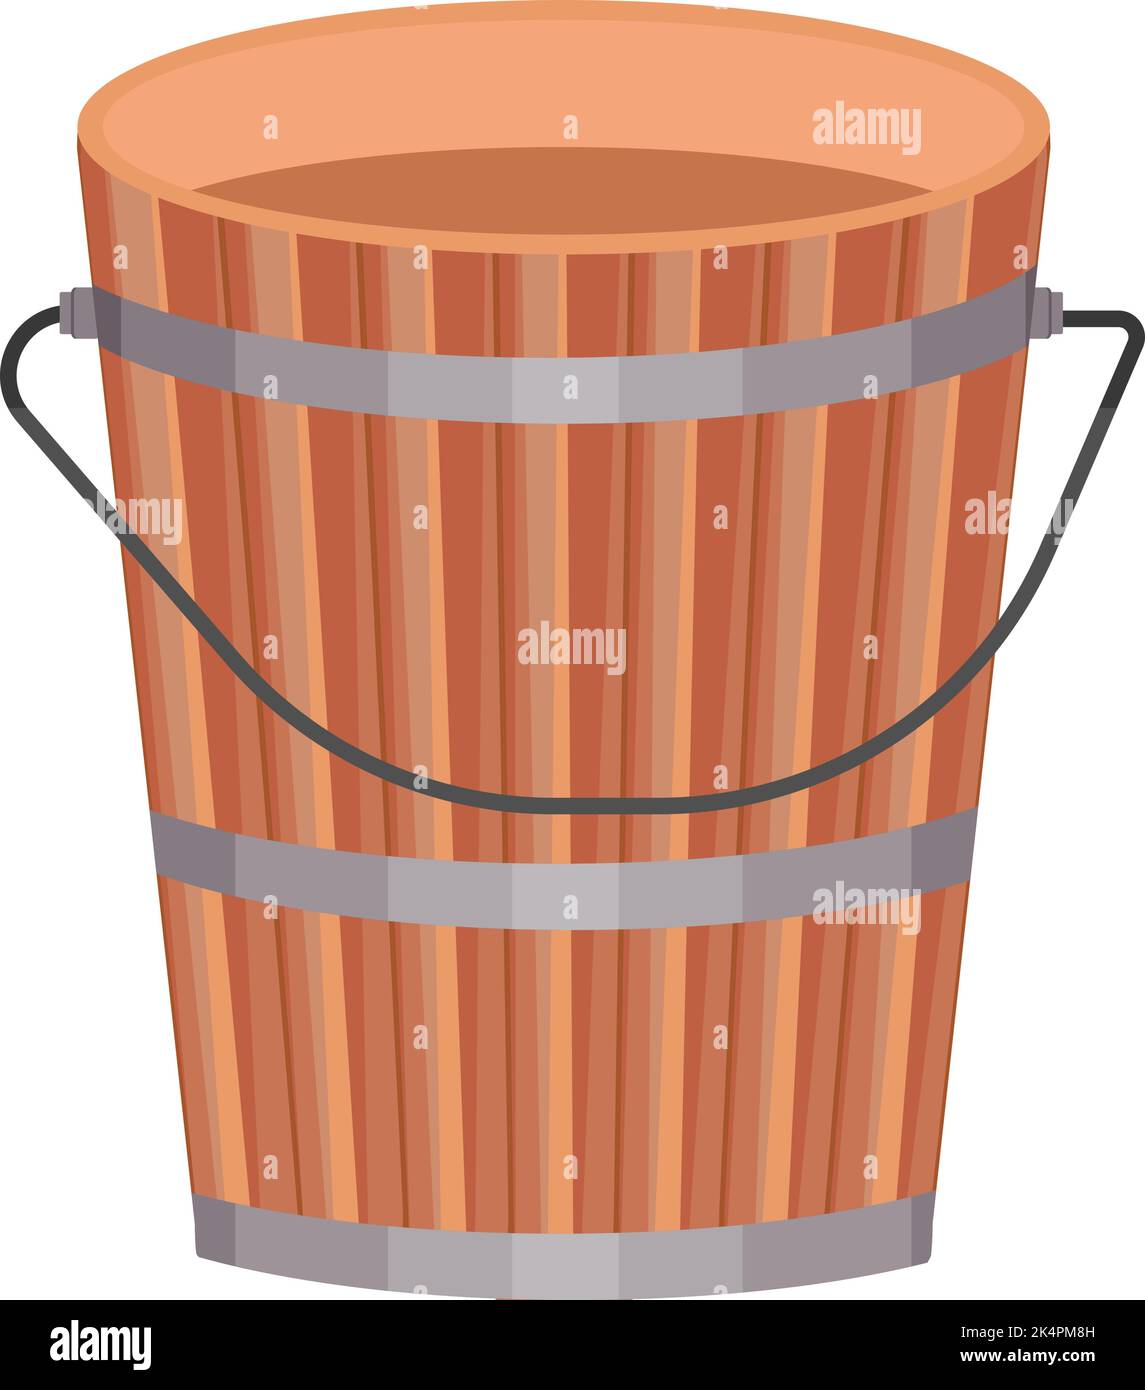 Wooden water bucket, illustration, vector on a white background. Stock Vector